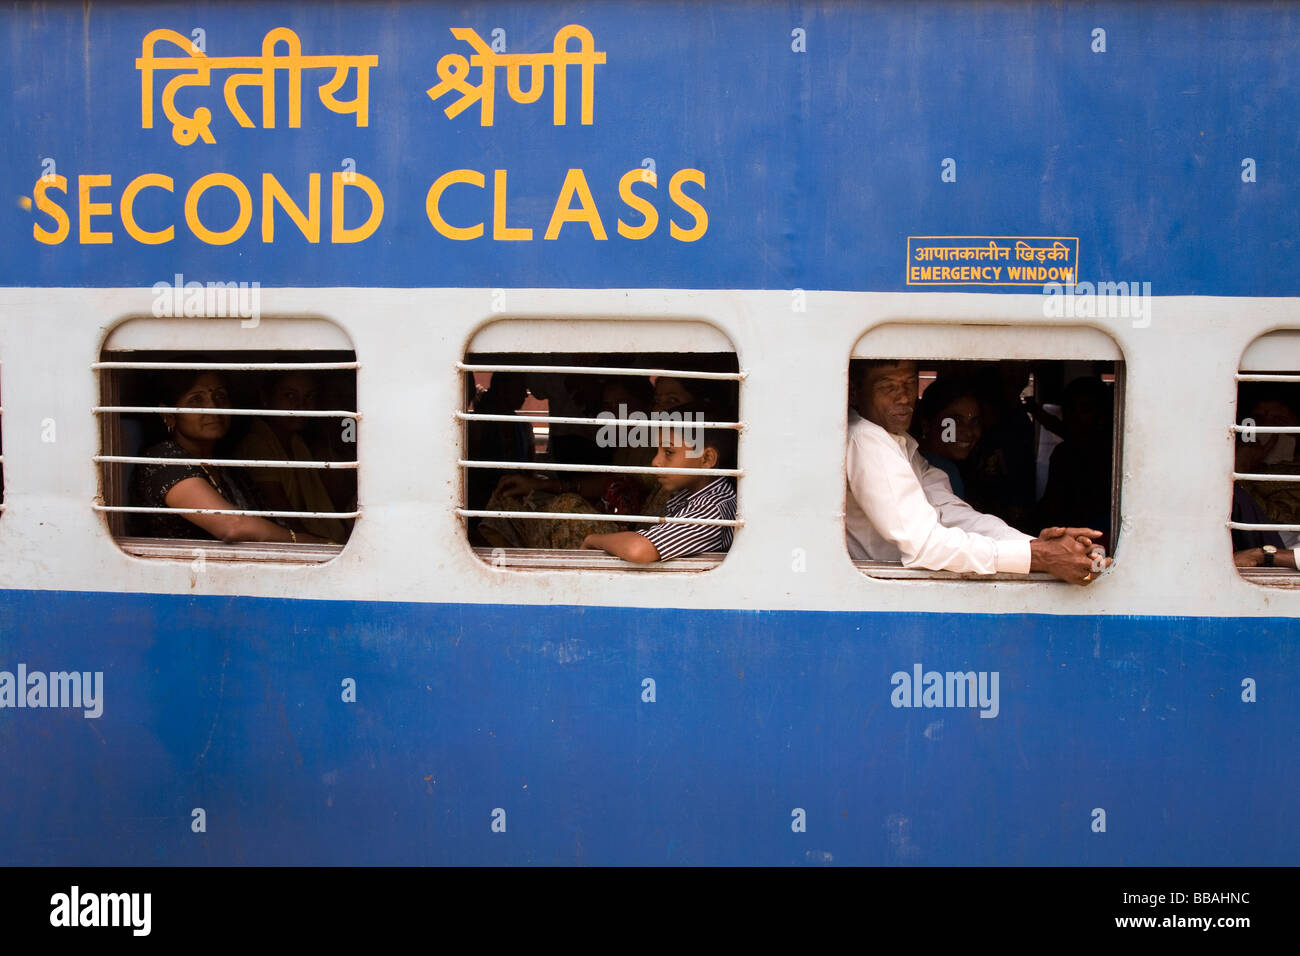 People sit inside of a second class carriage on a train in India. Many of the windows have bars on them. Stock Photo